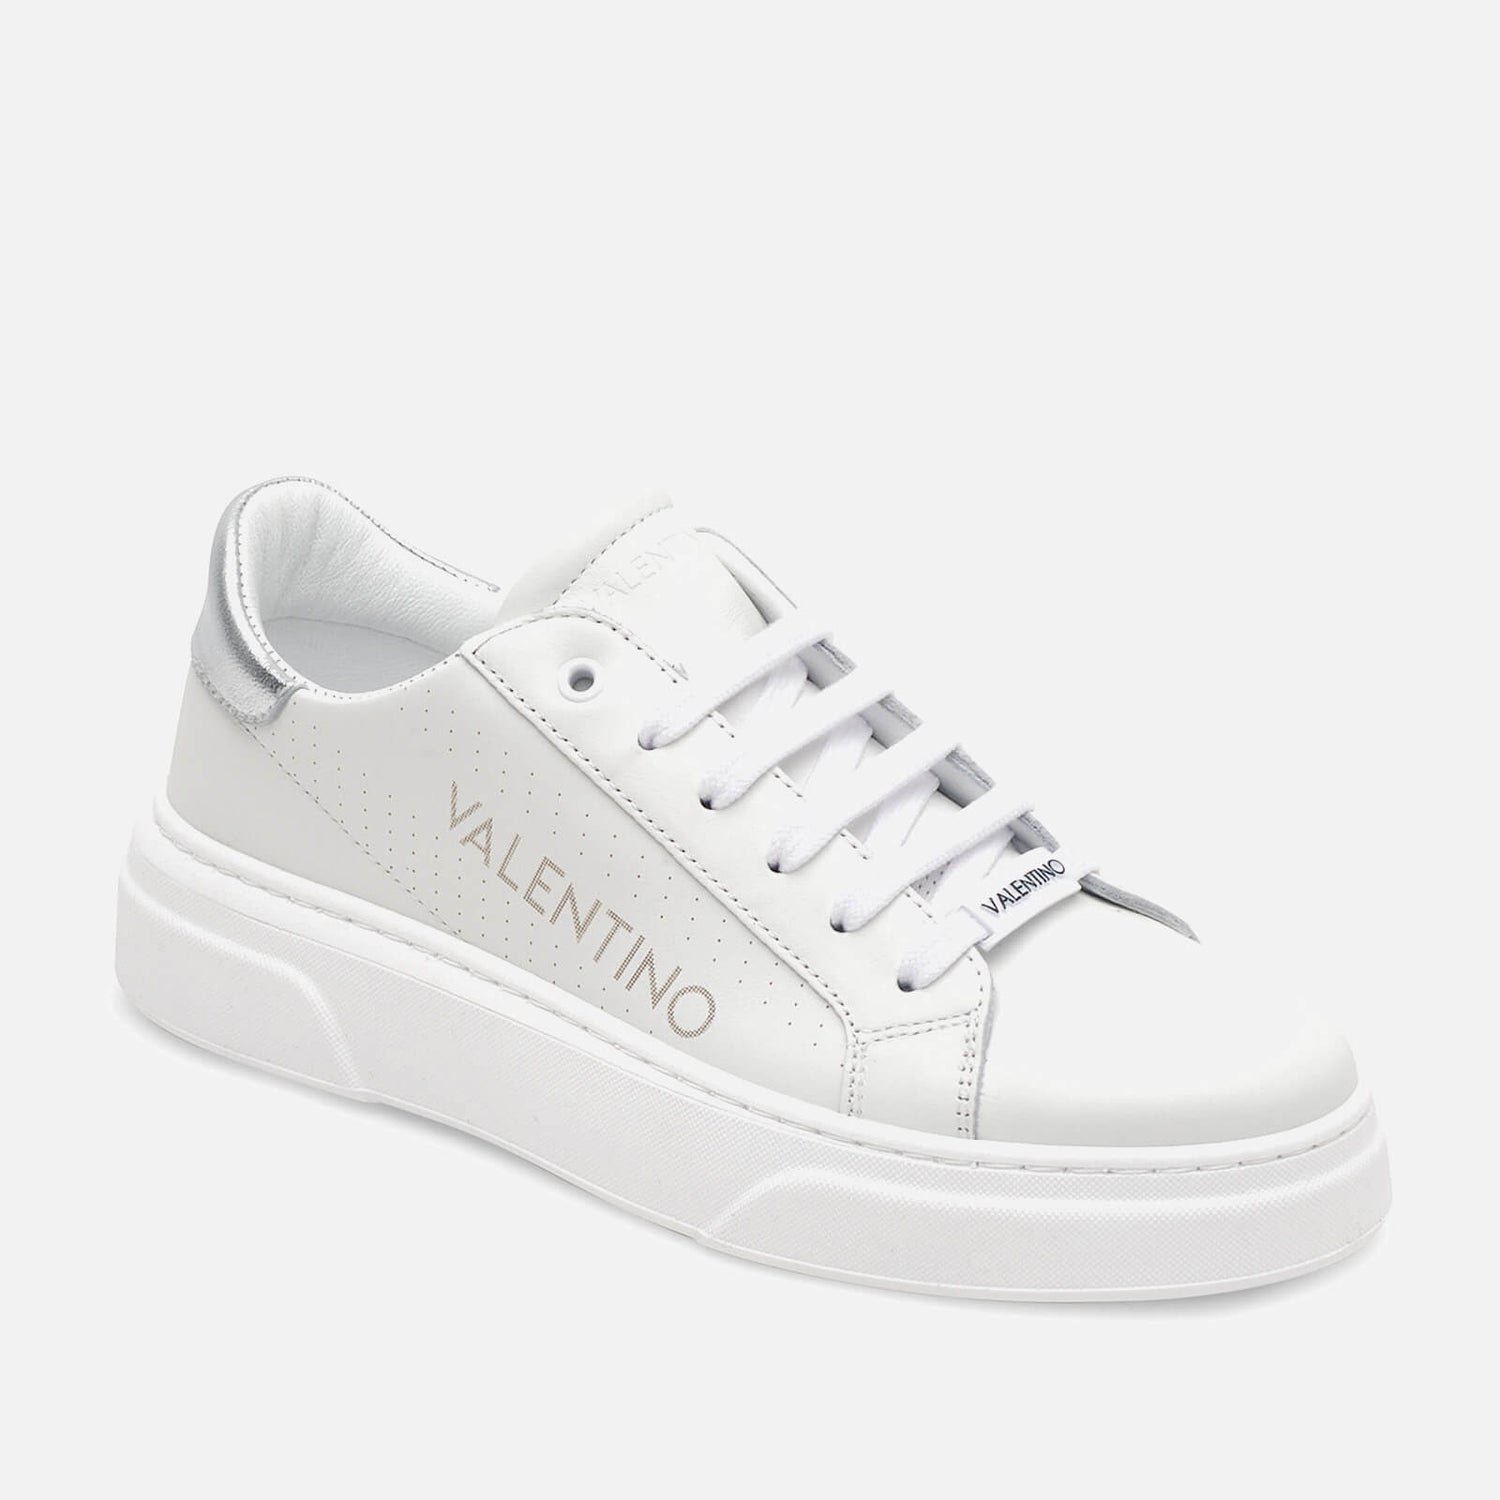 Valentino Shoes Women's Leather Cupsole Trainers - White/Silver - UK 3